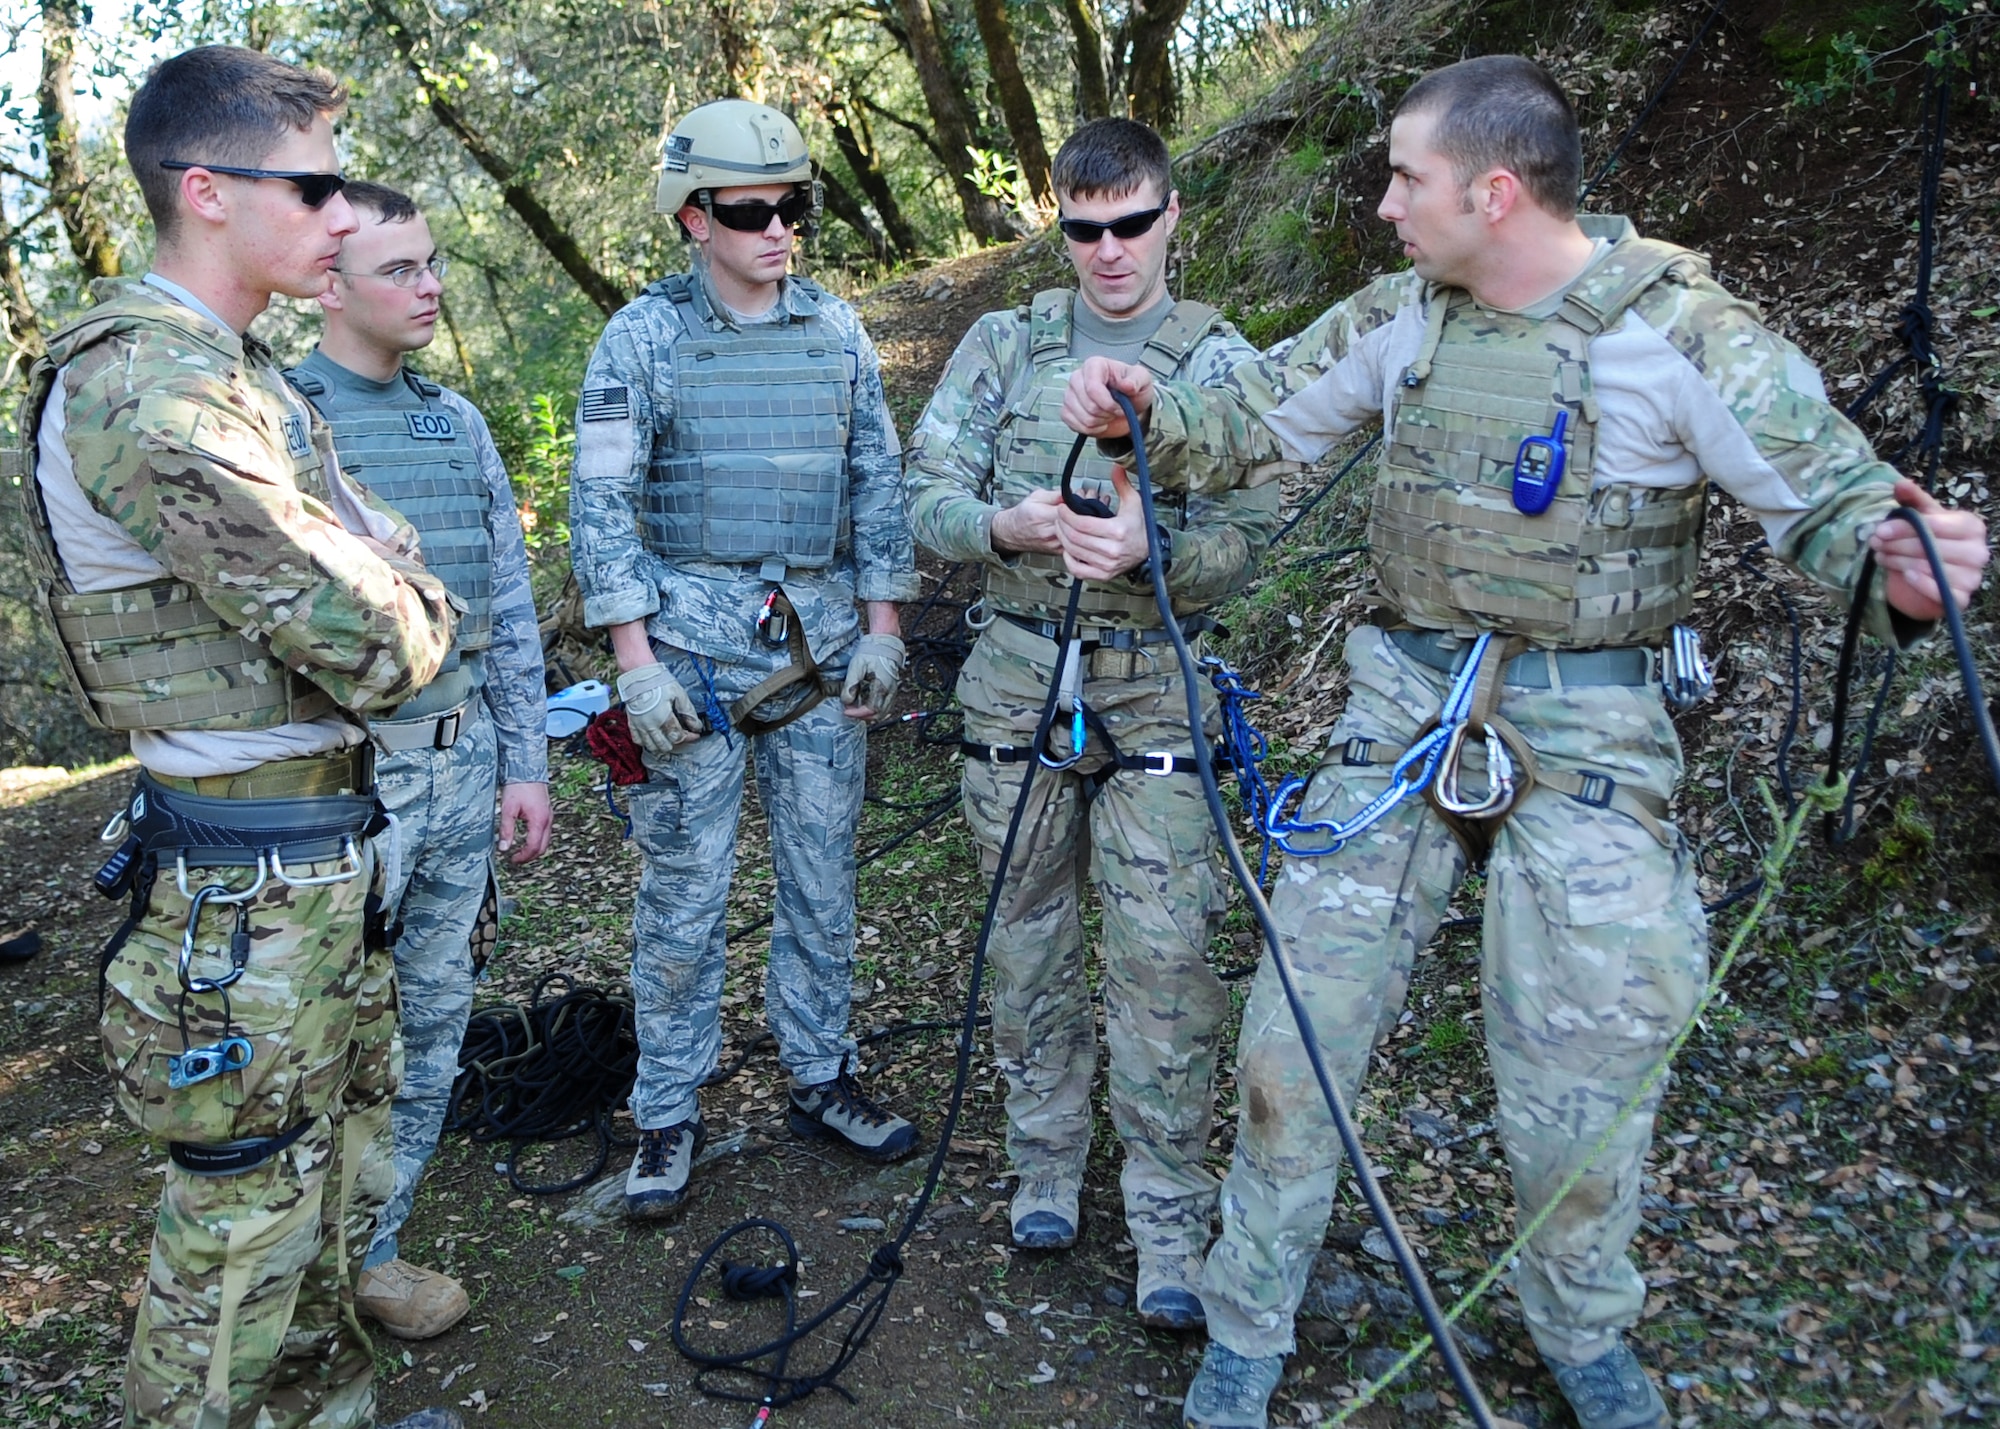 (Right) Staff Sgt. Scott Love, 9th Civil Engineer Squadron explosive ordnance disposal technician, explains the gear used to repel to fellow EOD Airmen during training in Auburn, Calif., Feb. 17, 2012. Love was preparing to repel down a more than 200 foot cliff with a simulated casualty. (U.S. Air Force photo by Senior Airman Shawn Nickel/Released)